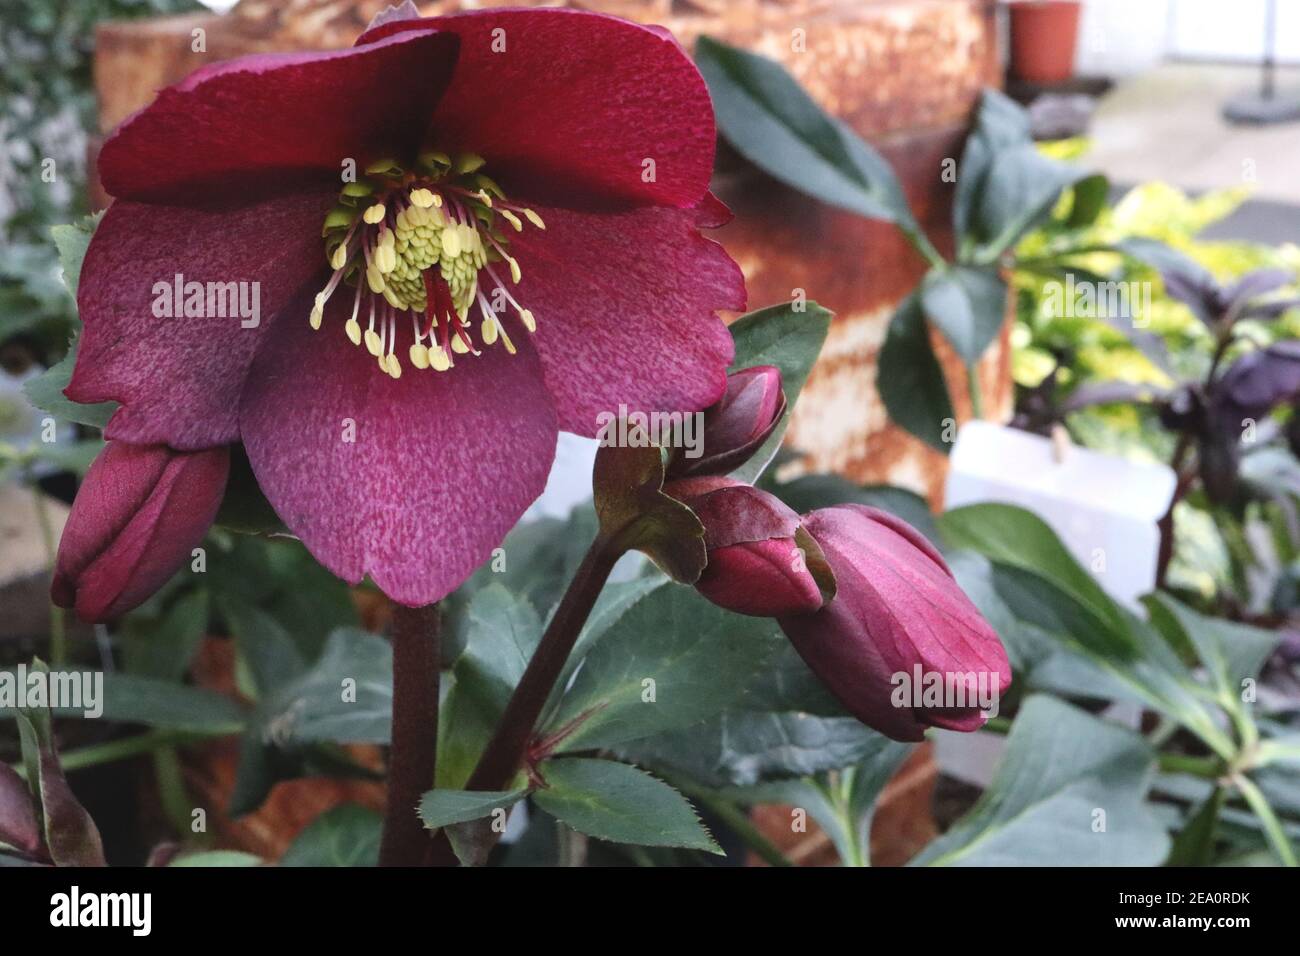 Helleborus HGC Ice ‘n’ Roses Red’ Hellebore Ice ‘n’ Roses Red - deep red outward-facing flower, February, England, UK Stock Photo